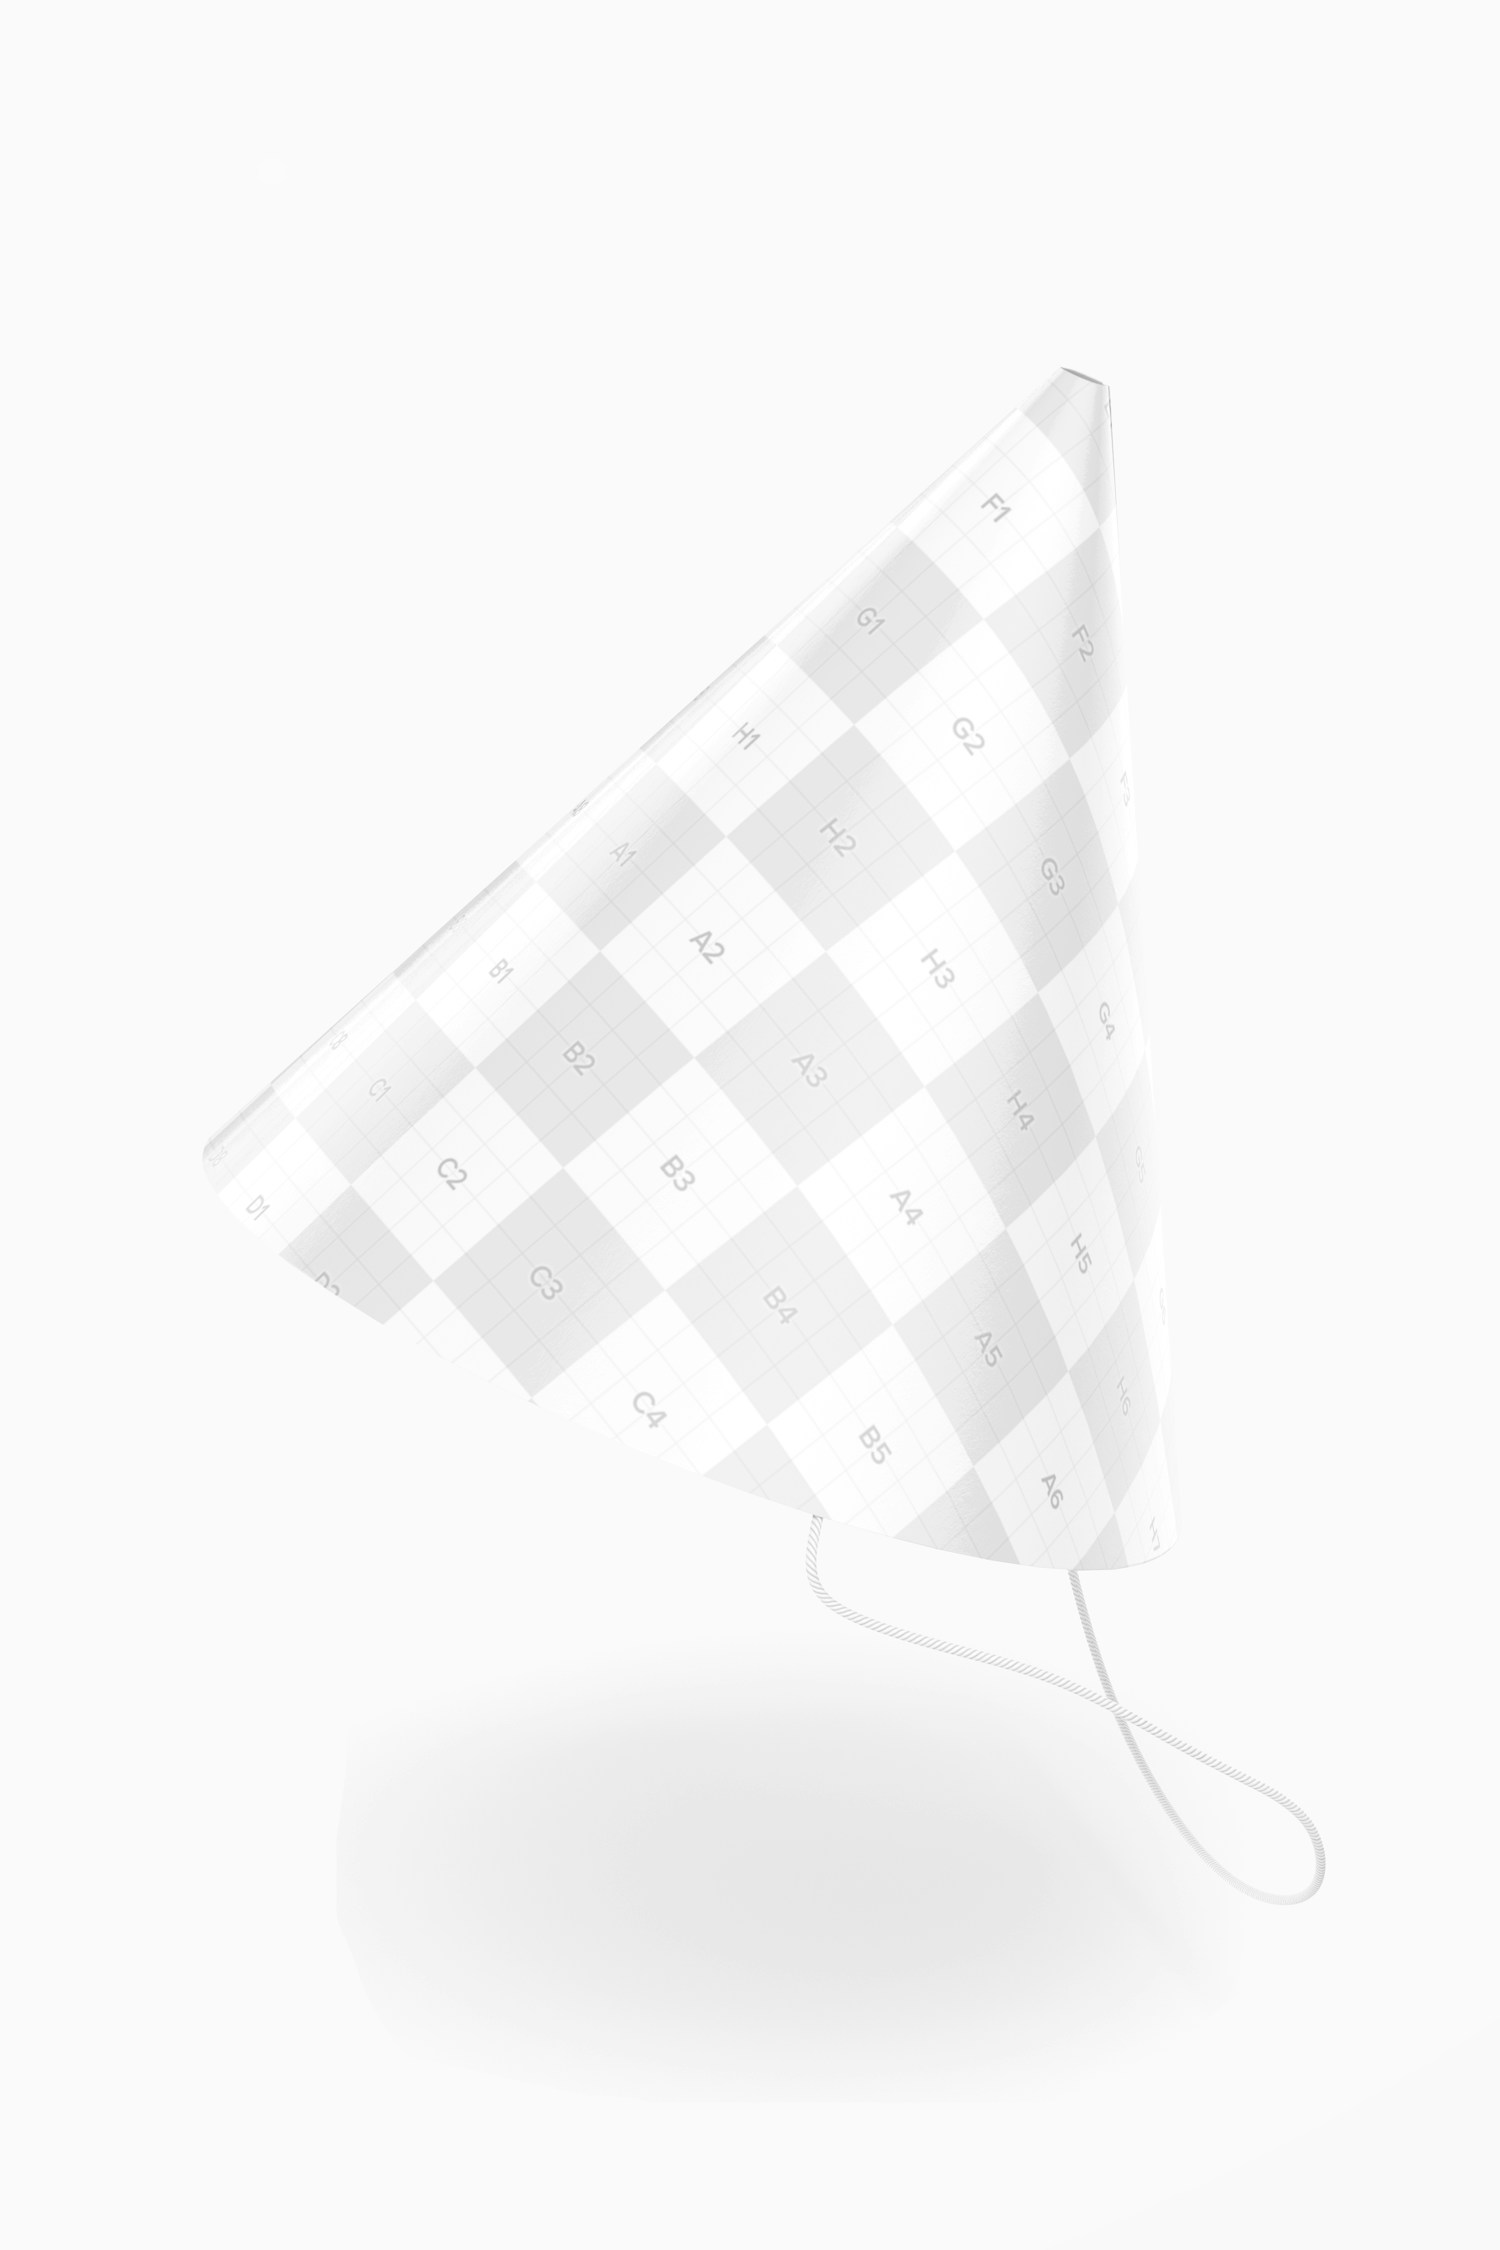 Glossy Party Hat Mockup, Floating